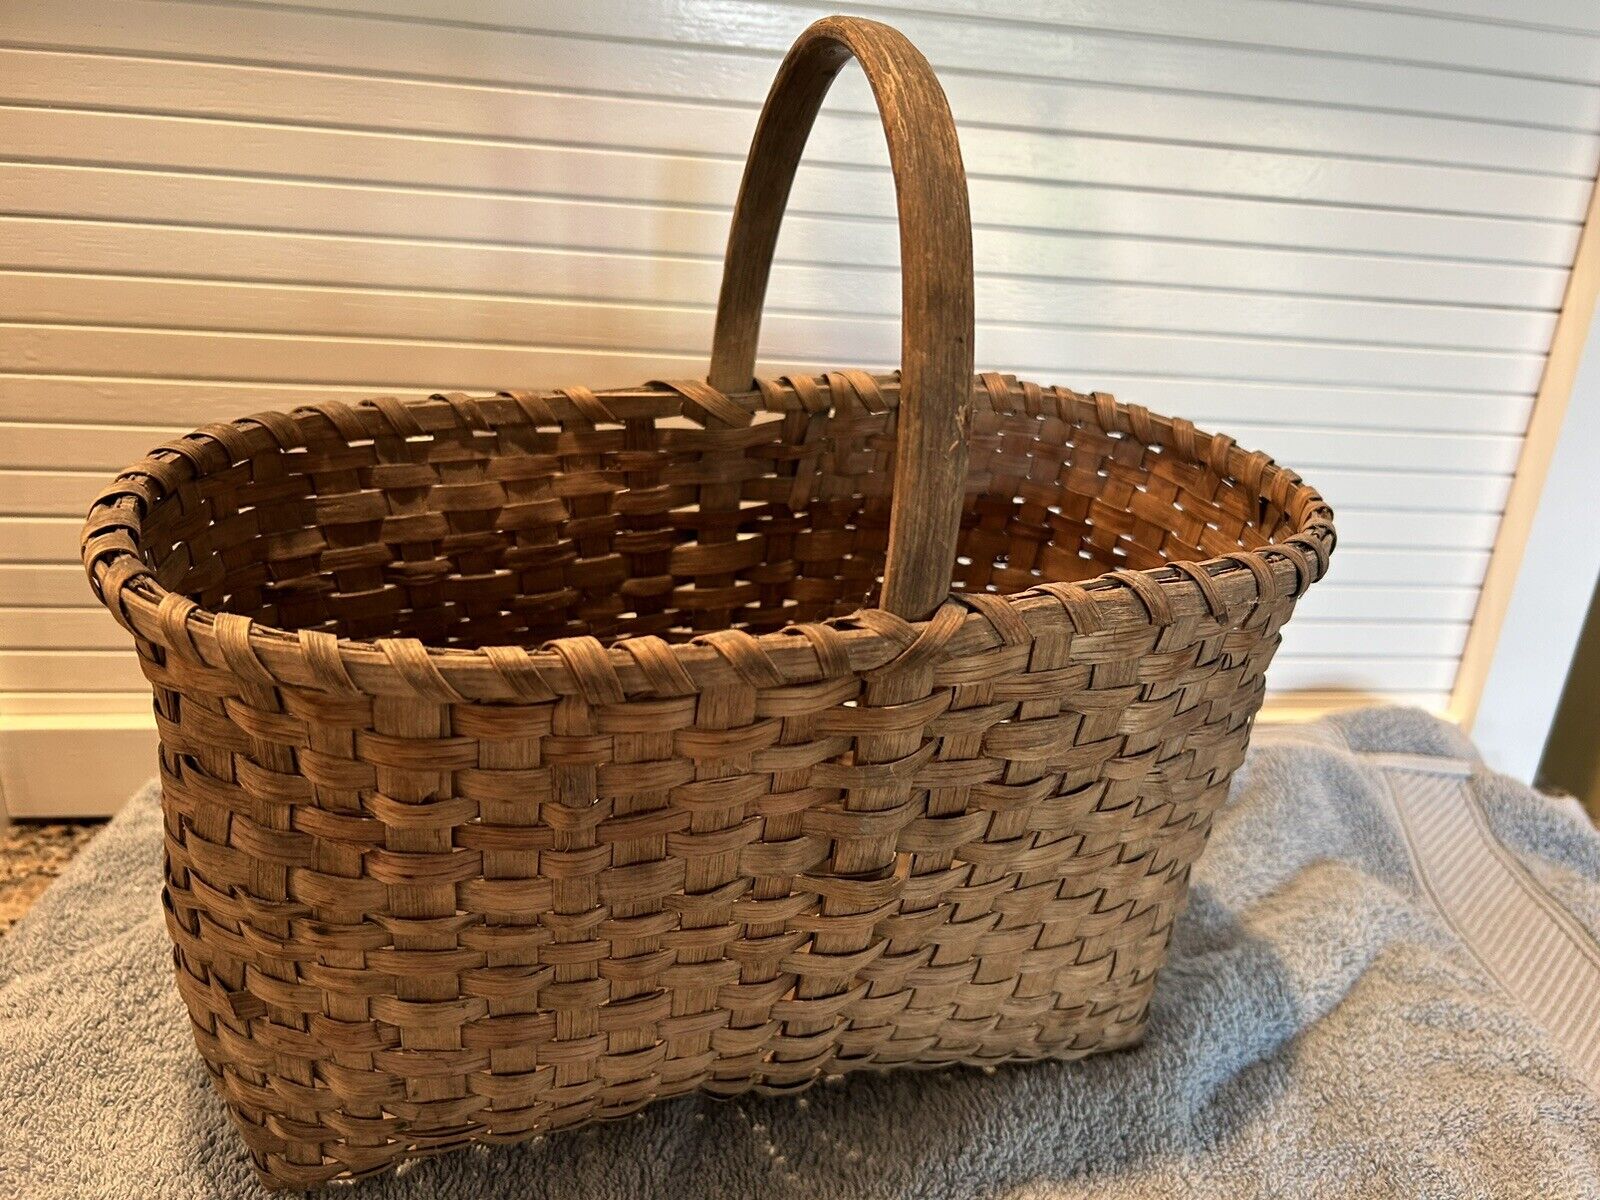 WONDERFUL OLD ANTIQUE HAND-WOVEN BASKET WITH HANDLE PROBABLY FROM THE 1800\'s